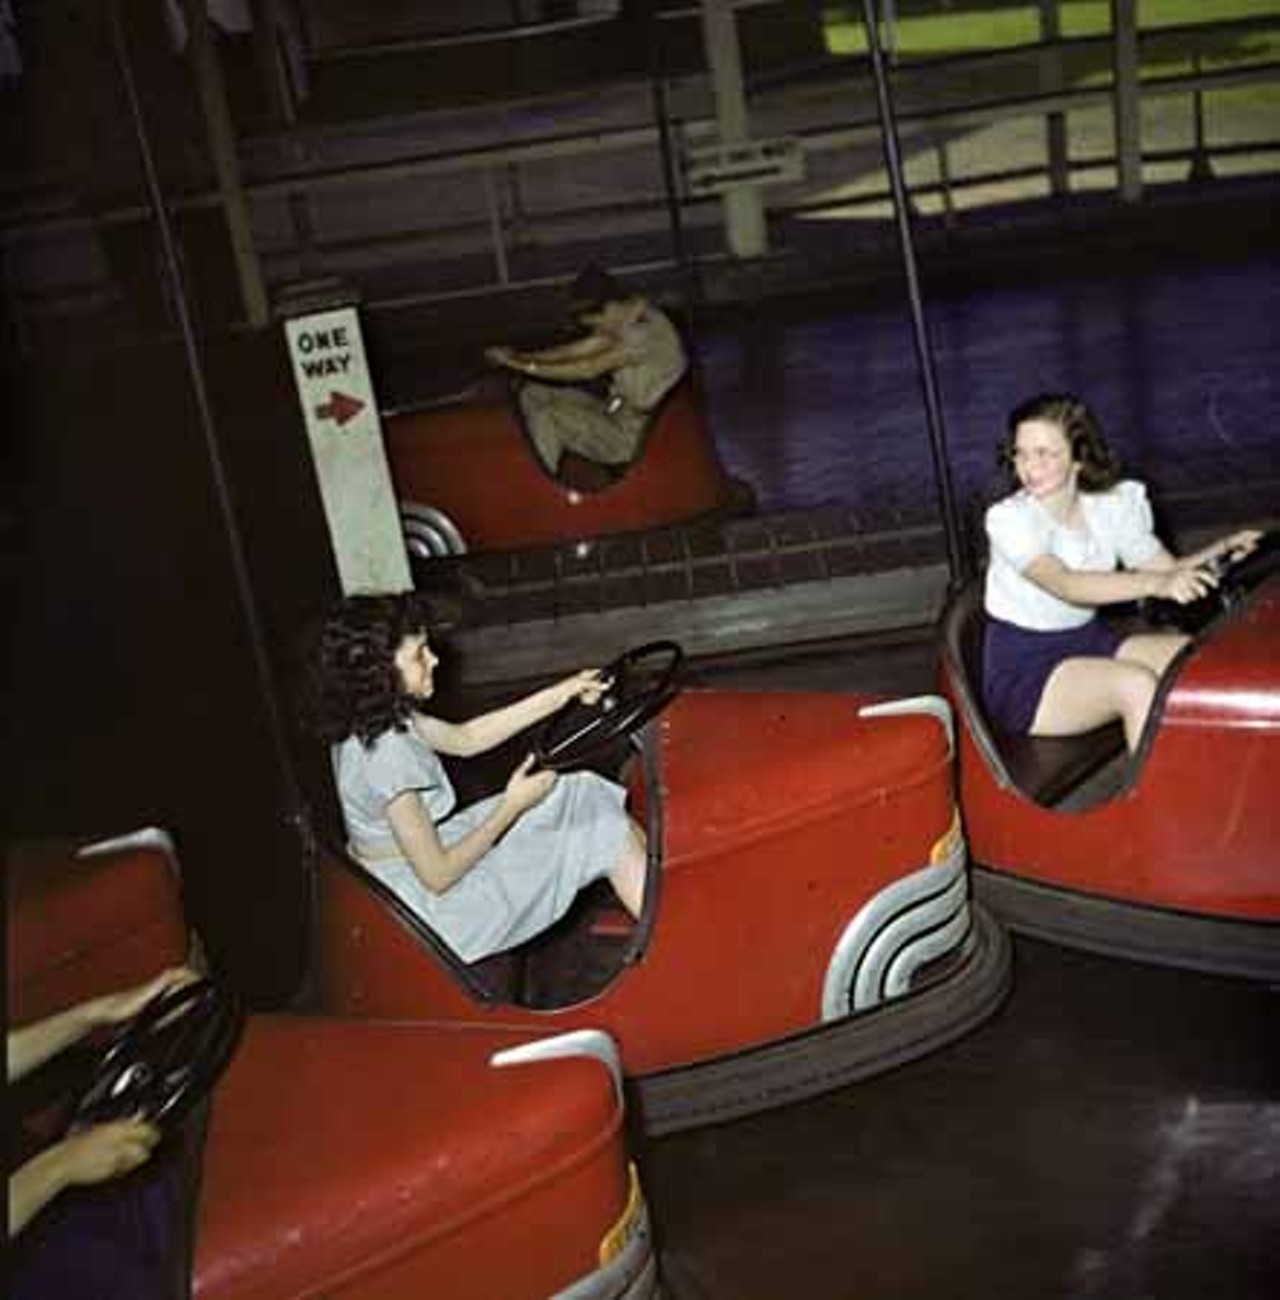 1947. You can't have an amusement park without bumper cars.